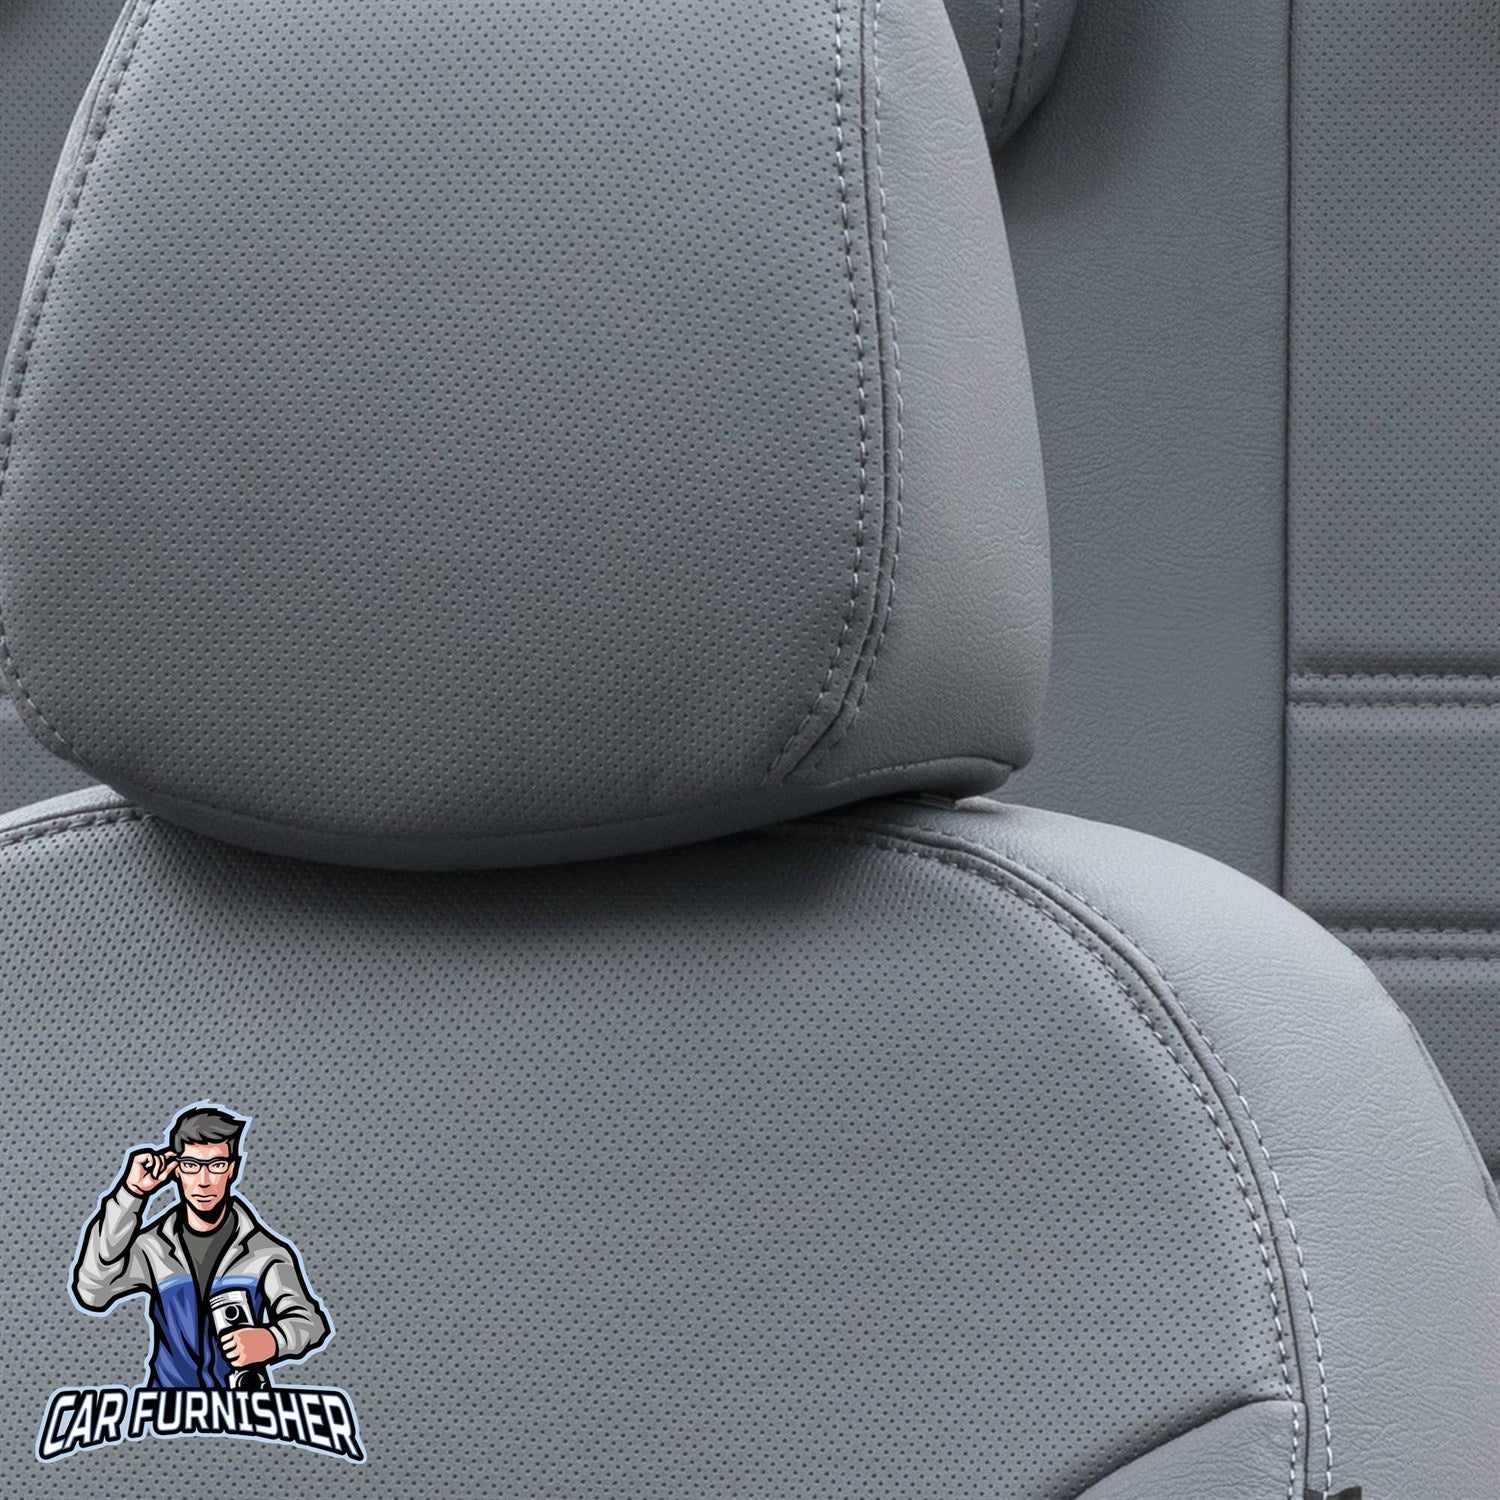 Mercedes E Class Seat Covers Istanbul Leather Design Smoked Leather